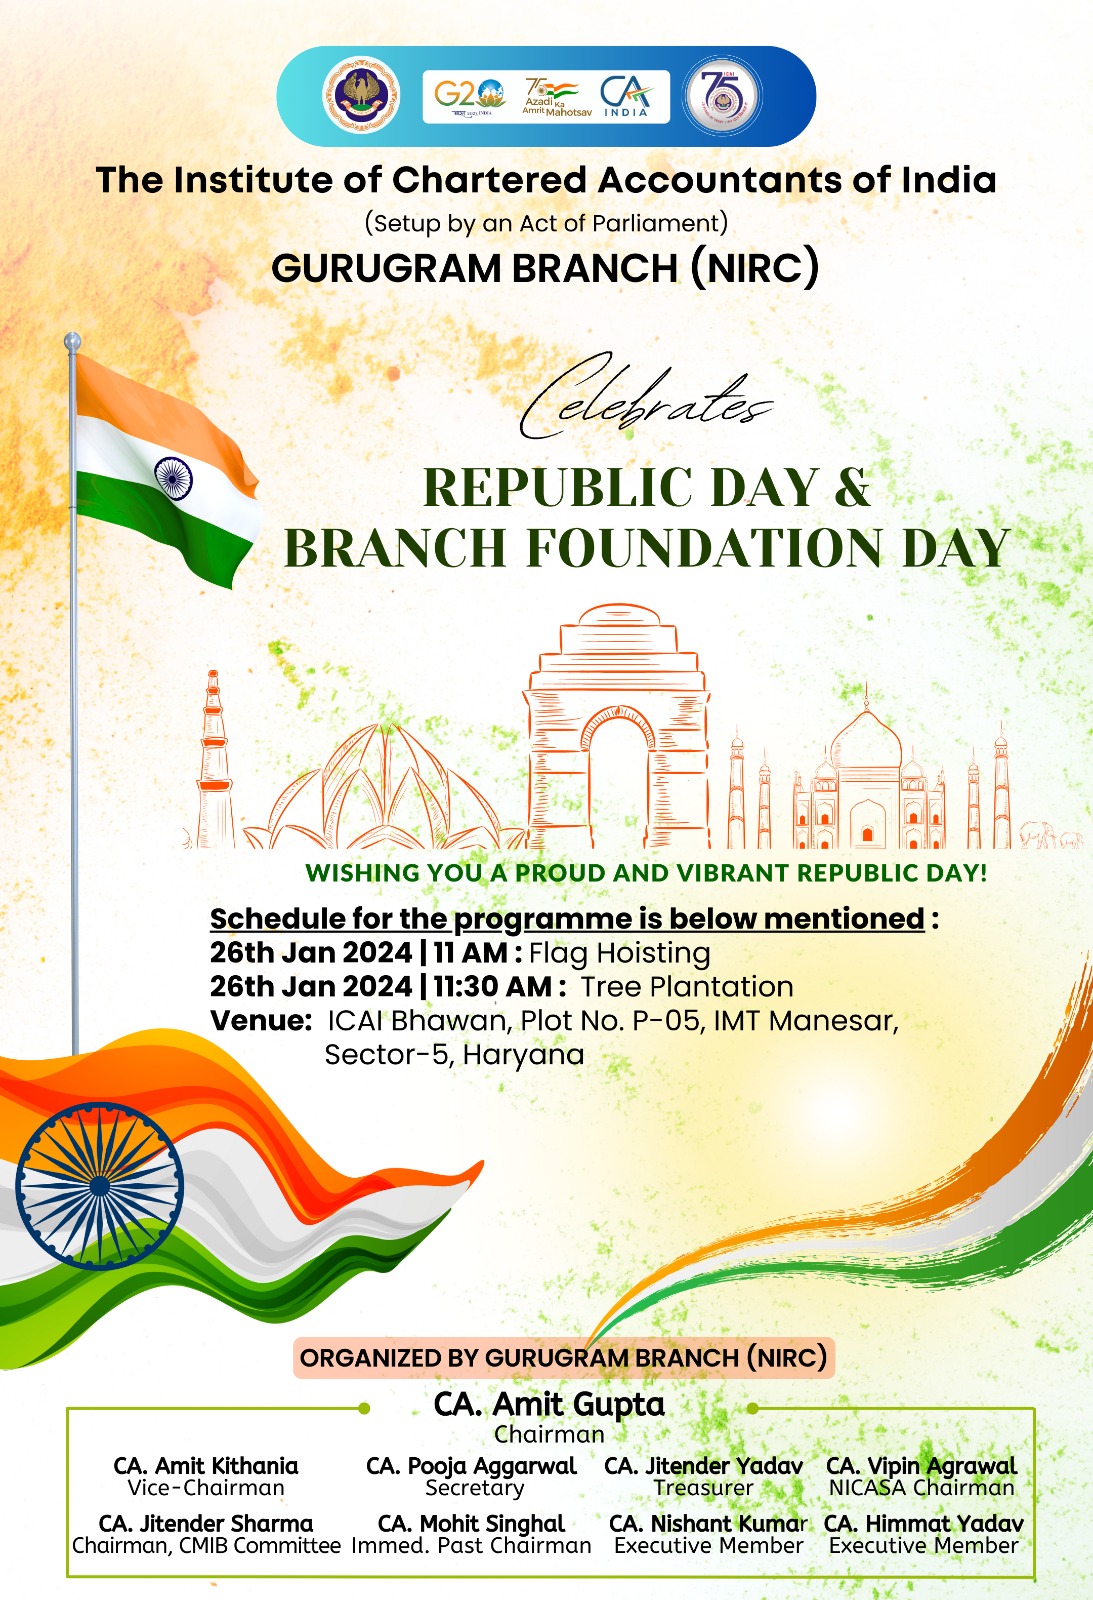 75th Republic Day and 25th Foundation Day of ICAI- Gurugram Branch (NIRC)